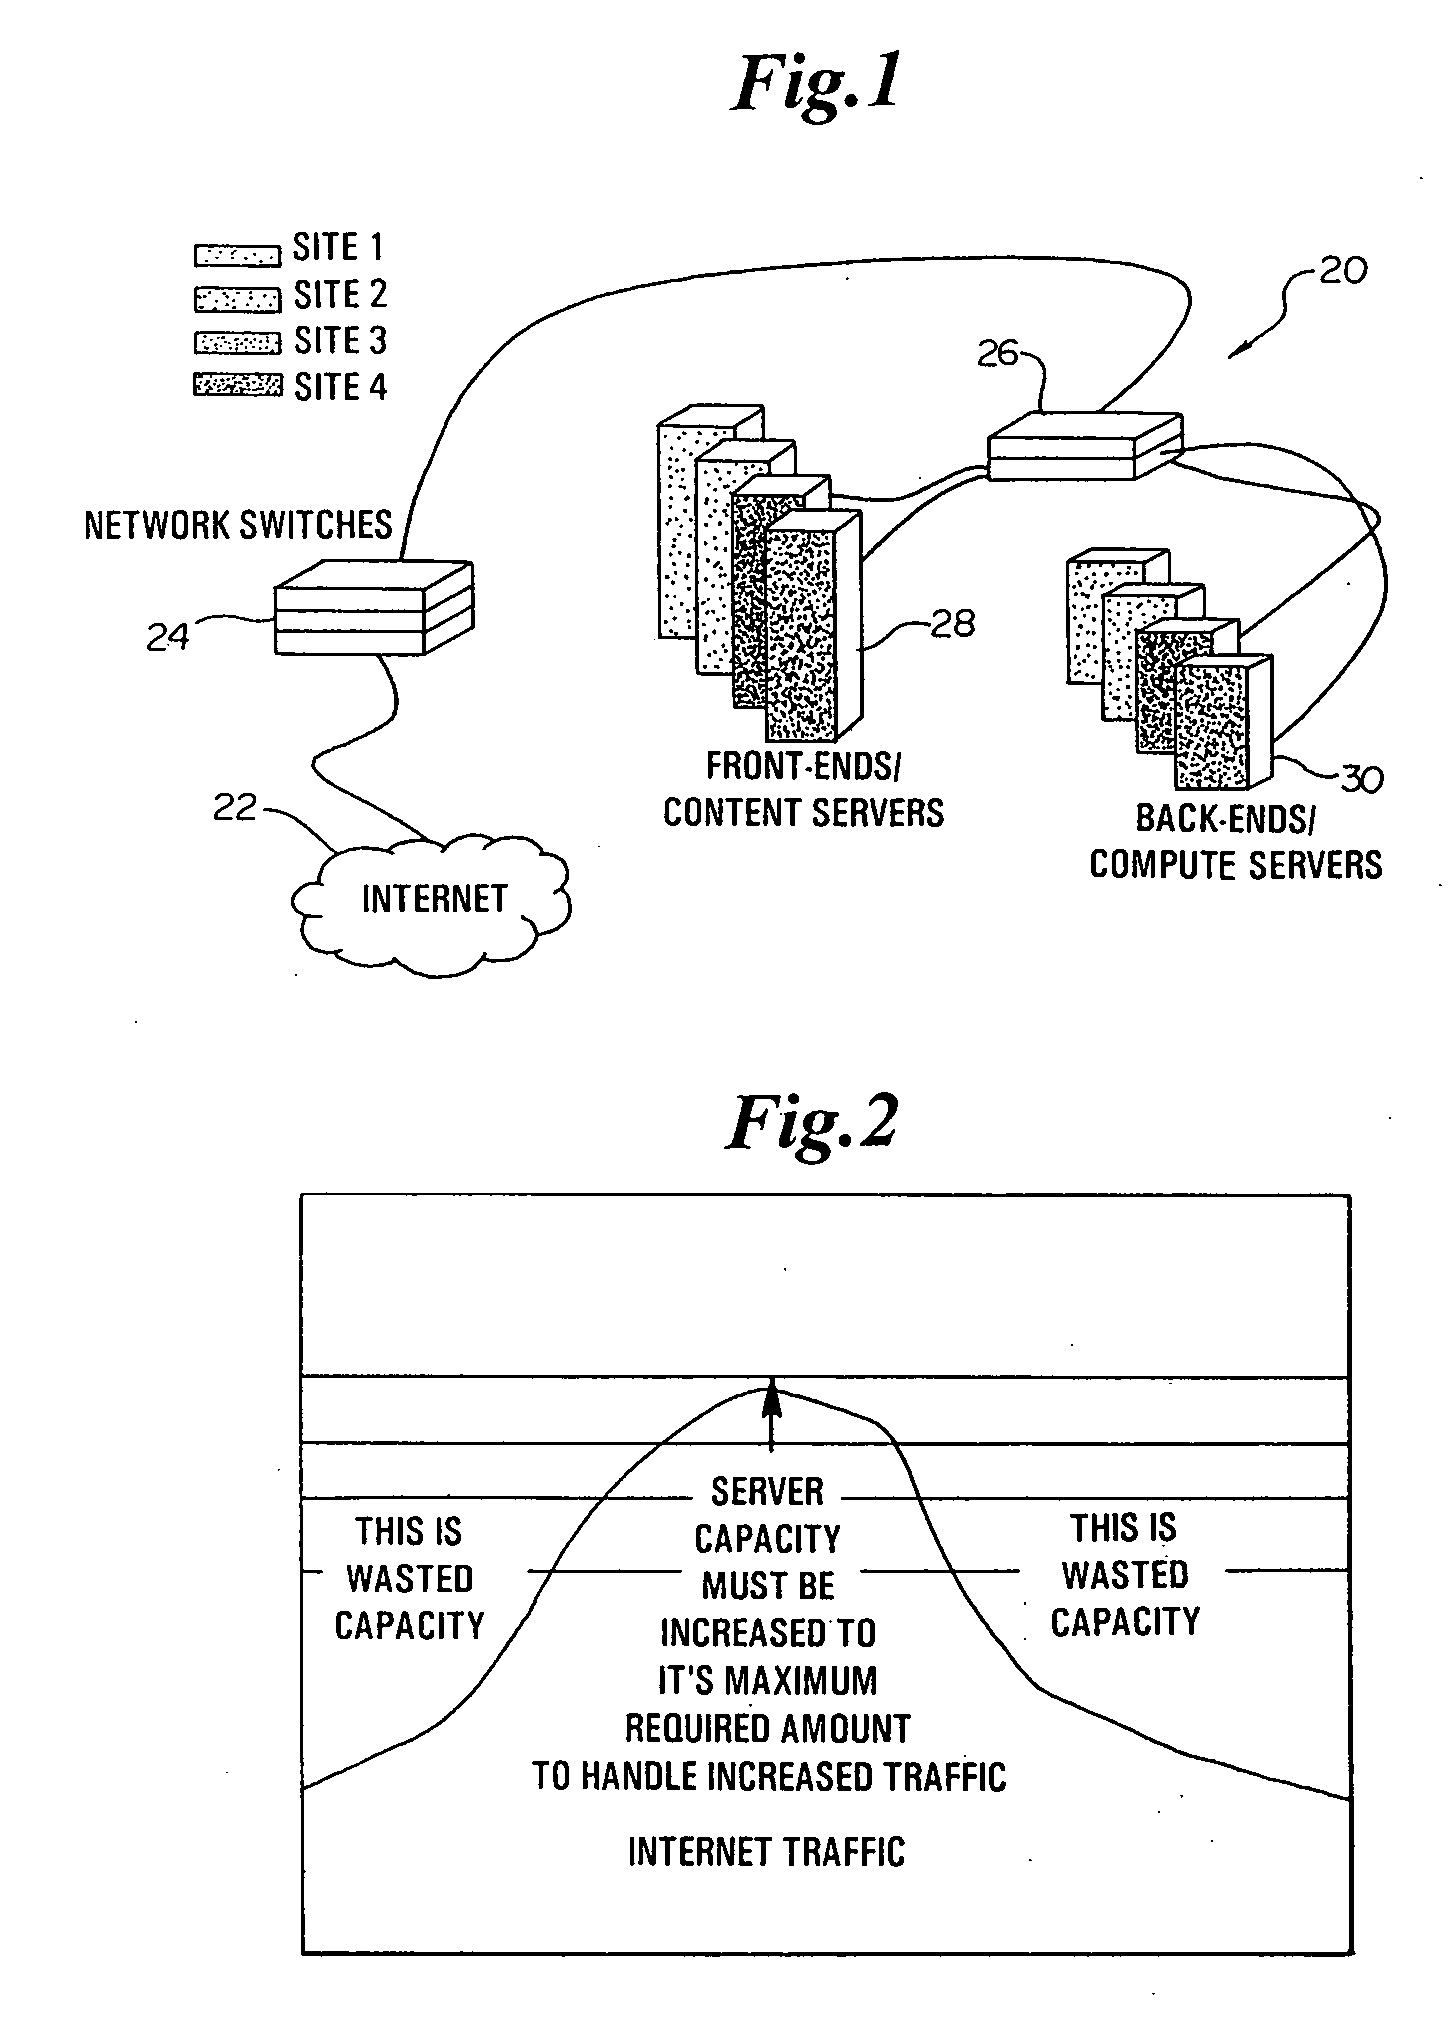 Method and system for providing dynamic hosted service management across disparate accounts/sites